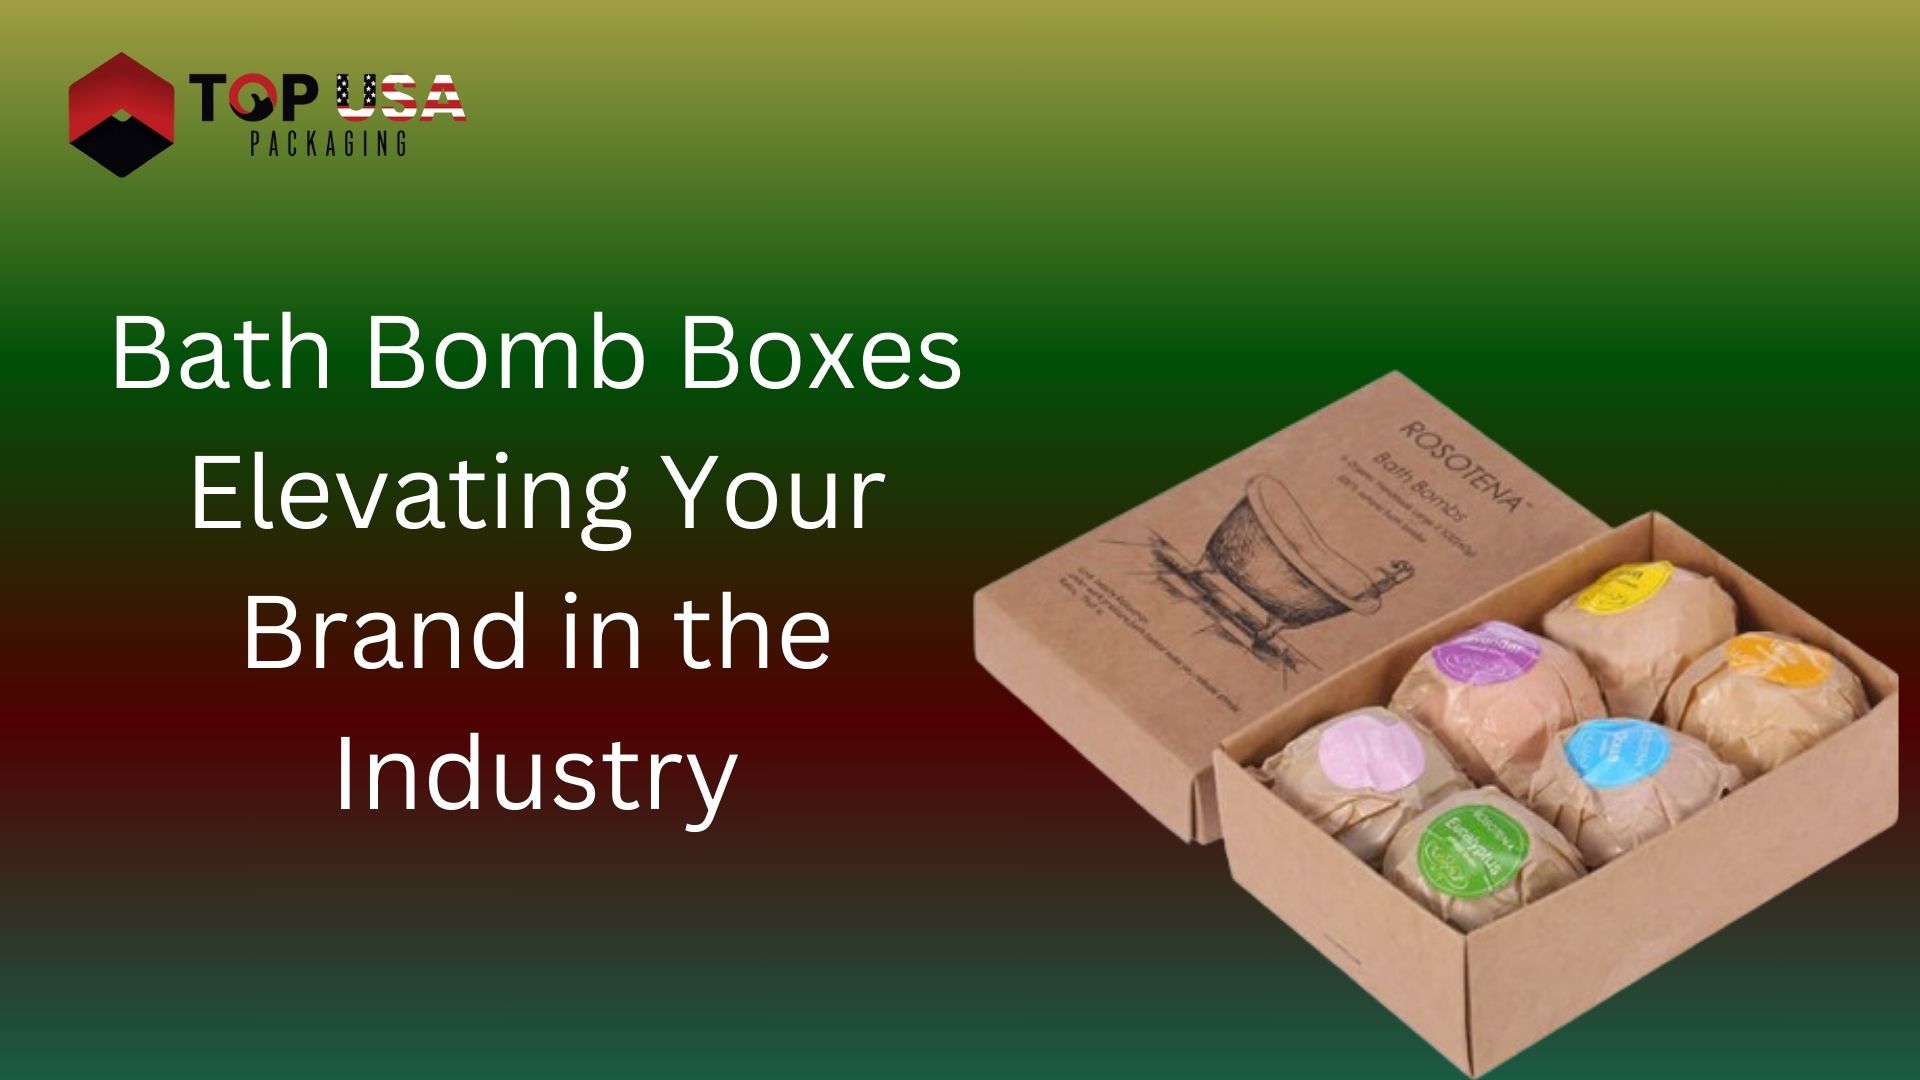 Bath Bomb Boxes Elevating Your Brand in the Industry